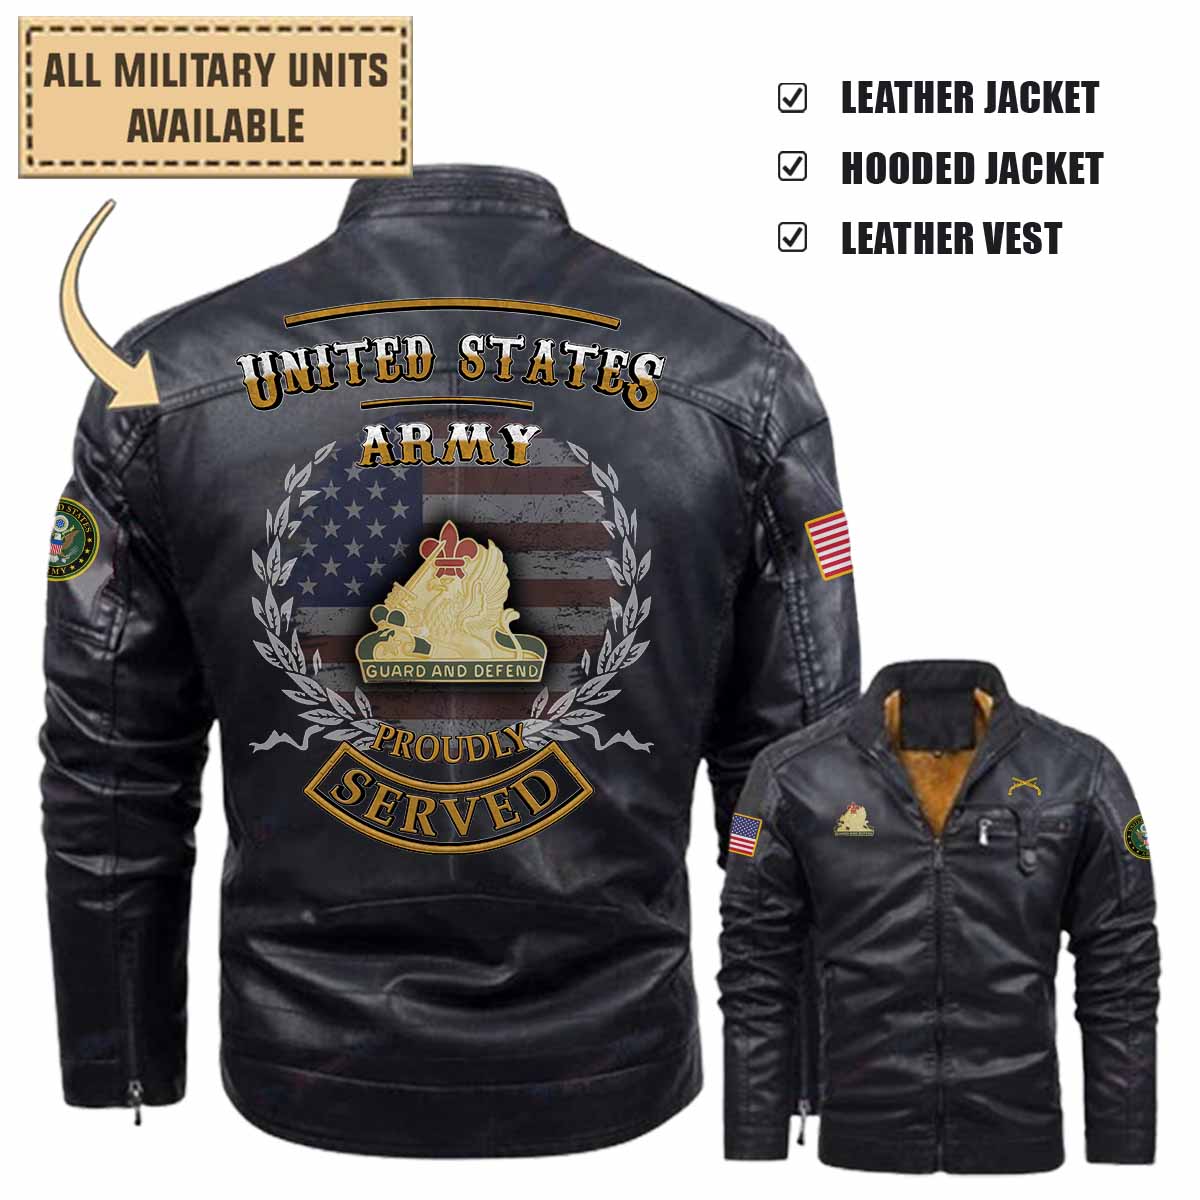 535th MP BN 535th Military Police Battalion_Military Leather Jacket and Vest